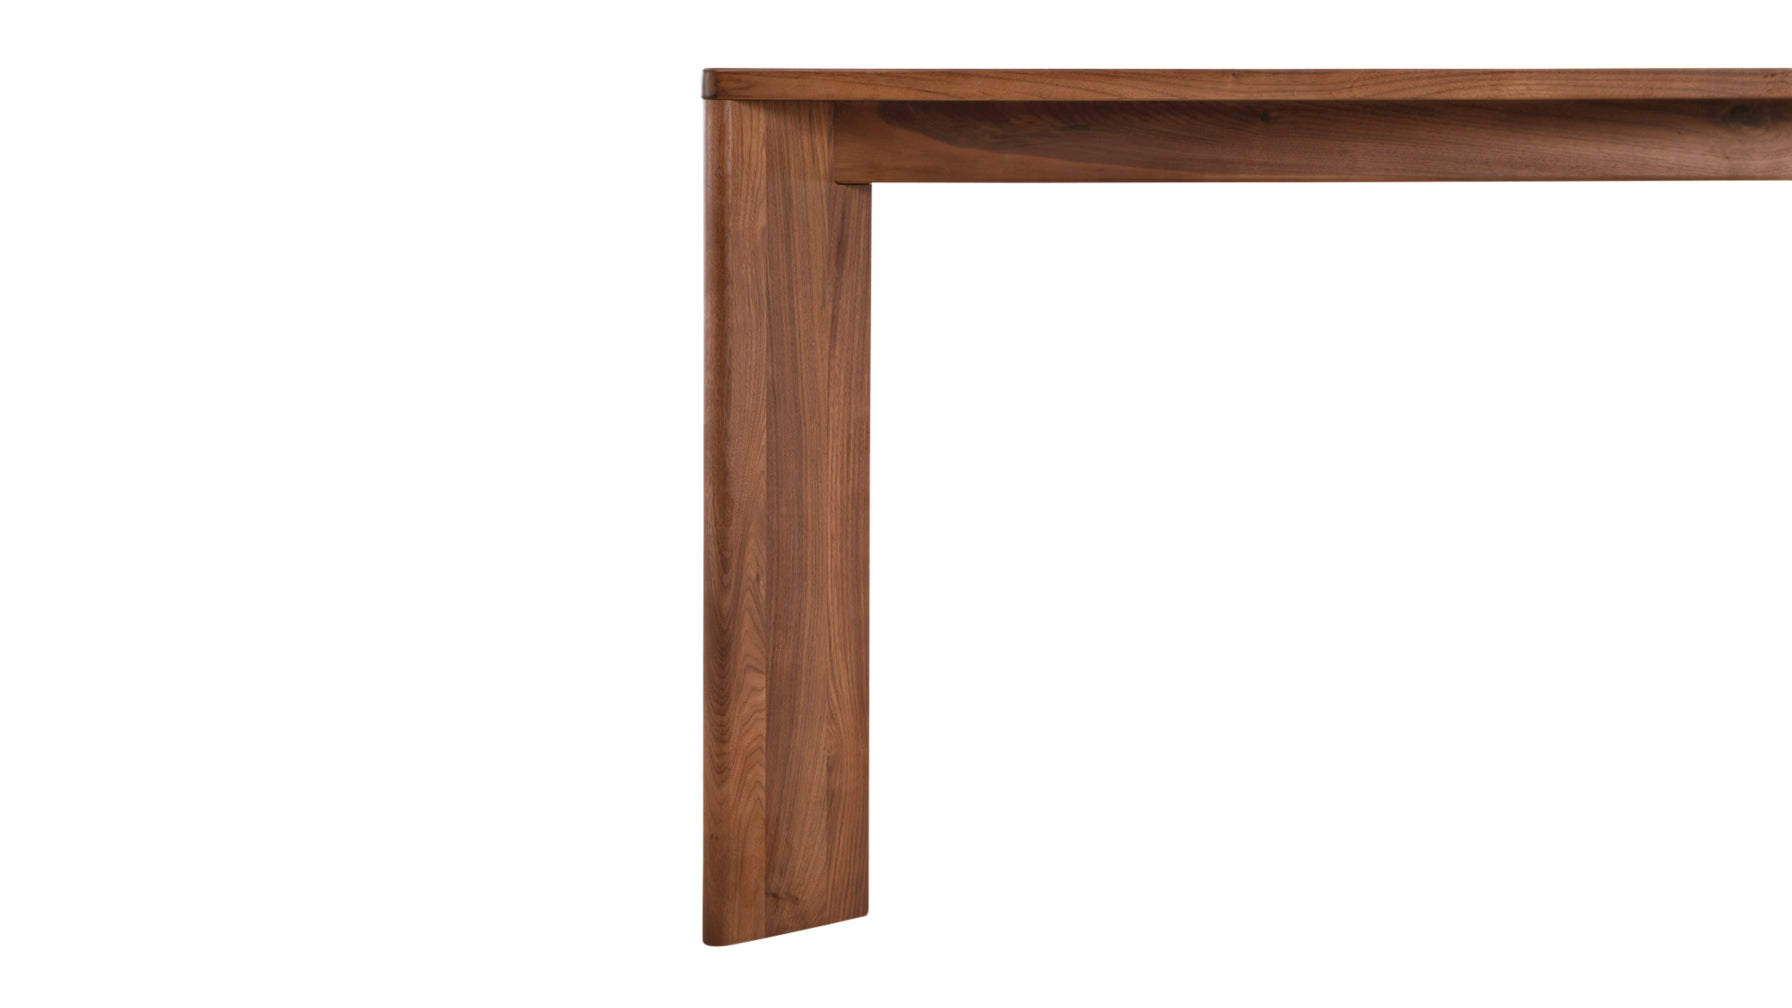 Frame Dining Table, Seats 4-6 People, Walnut - Image 7